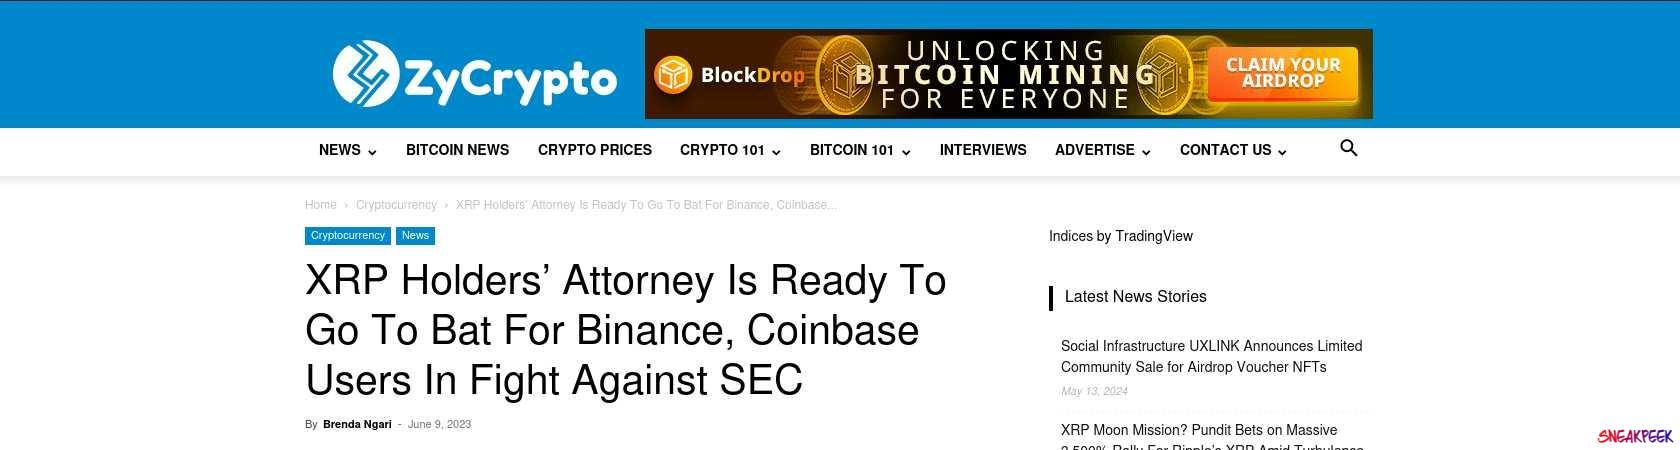 Read the full Article:  ⭲ XRP Holders’ Attorney Is Ready To Go To Bat For Binance, Coinbase Users In Fight Against SEC